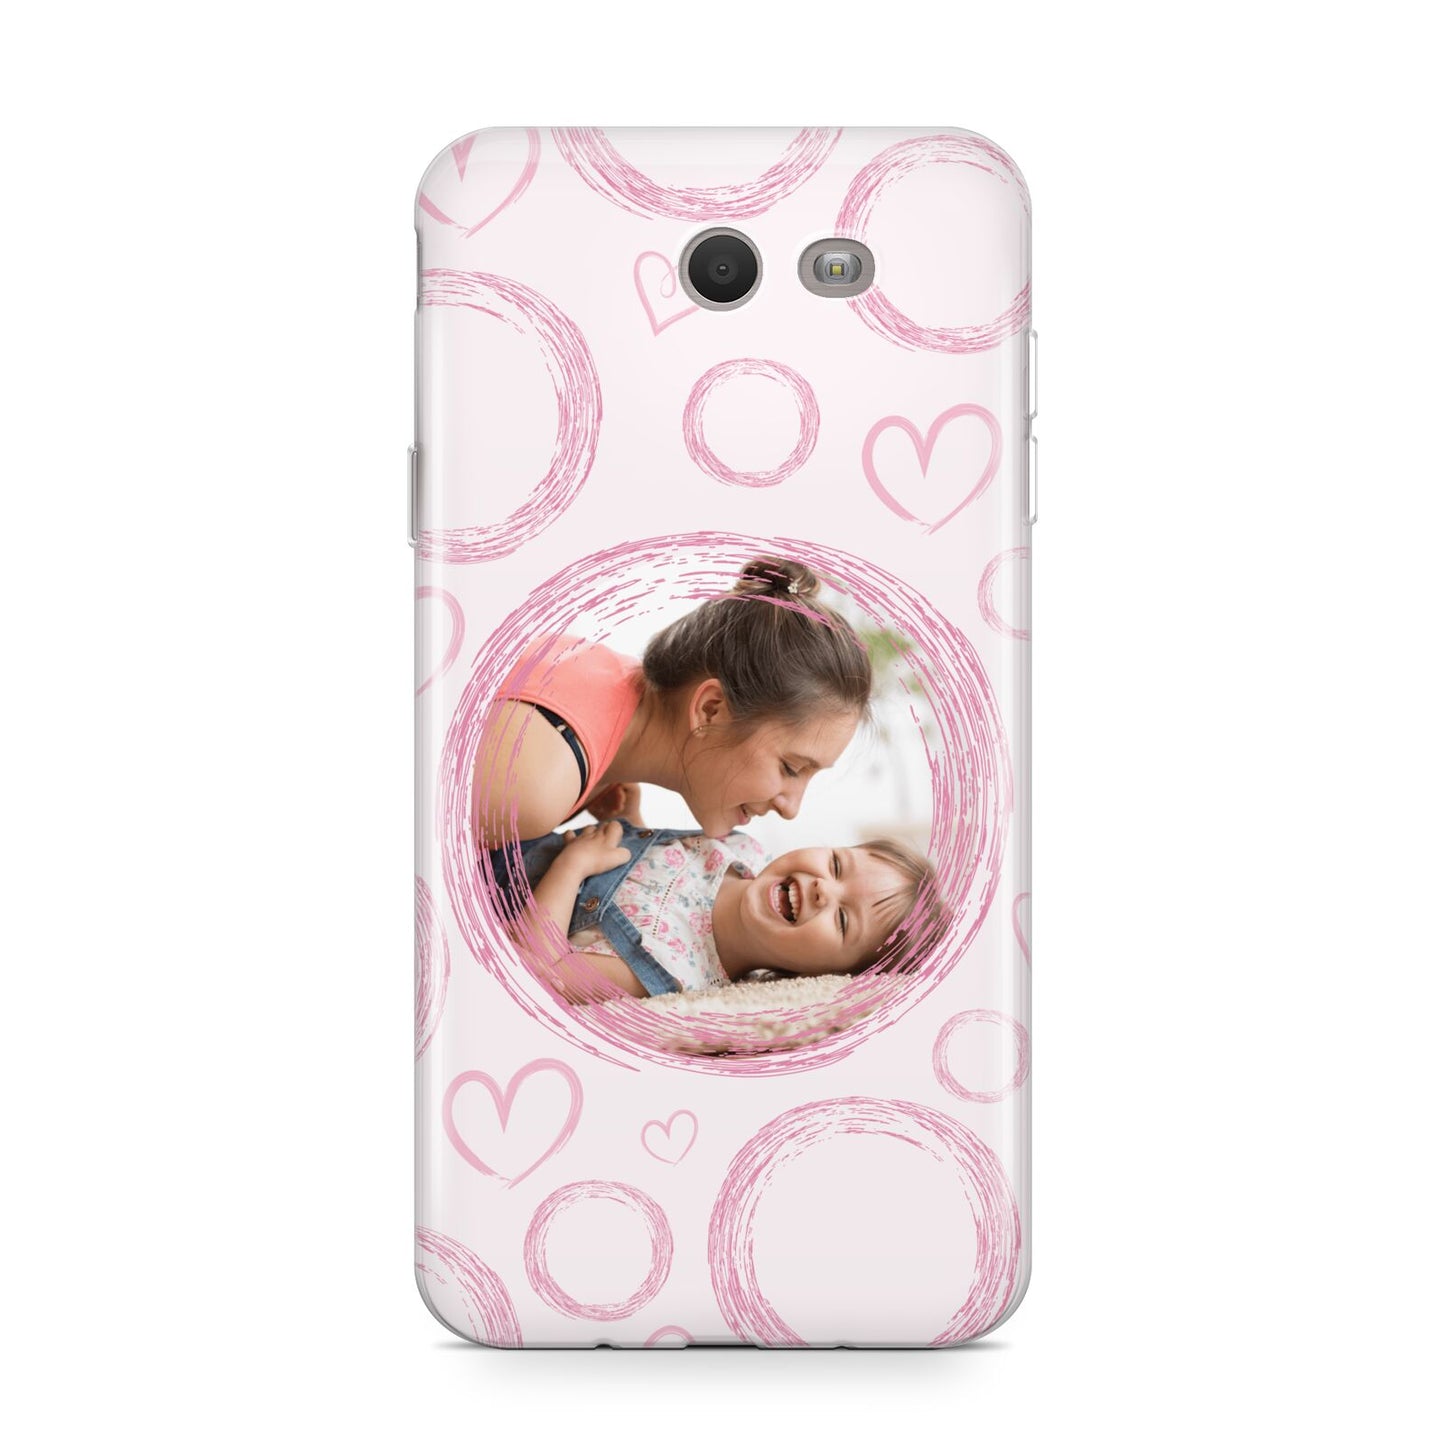 Pink Love Hearts Photo Personalised Samsung Galaxy J7 2017 Case